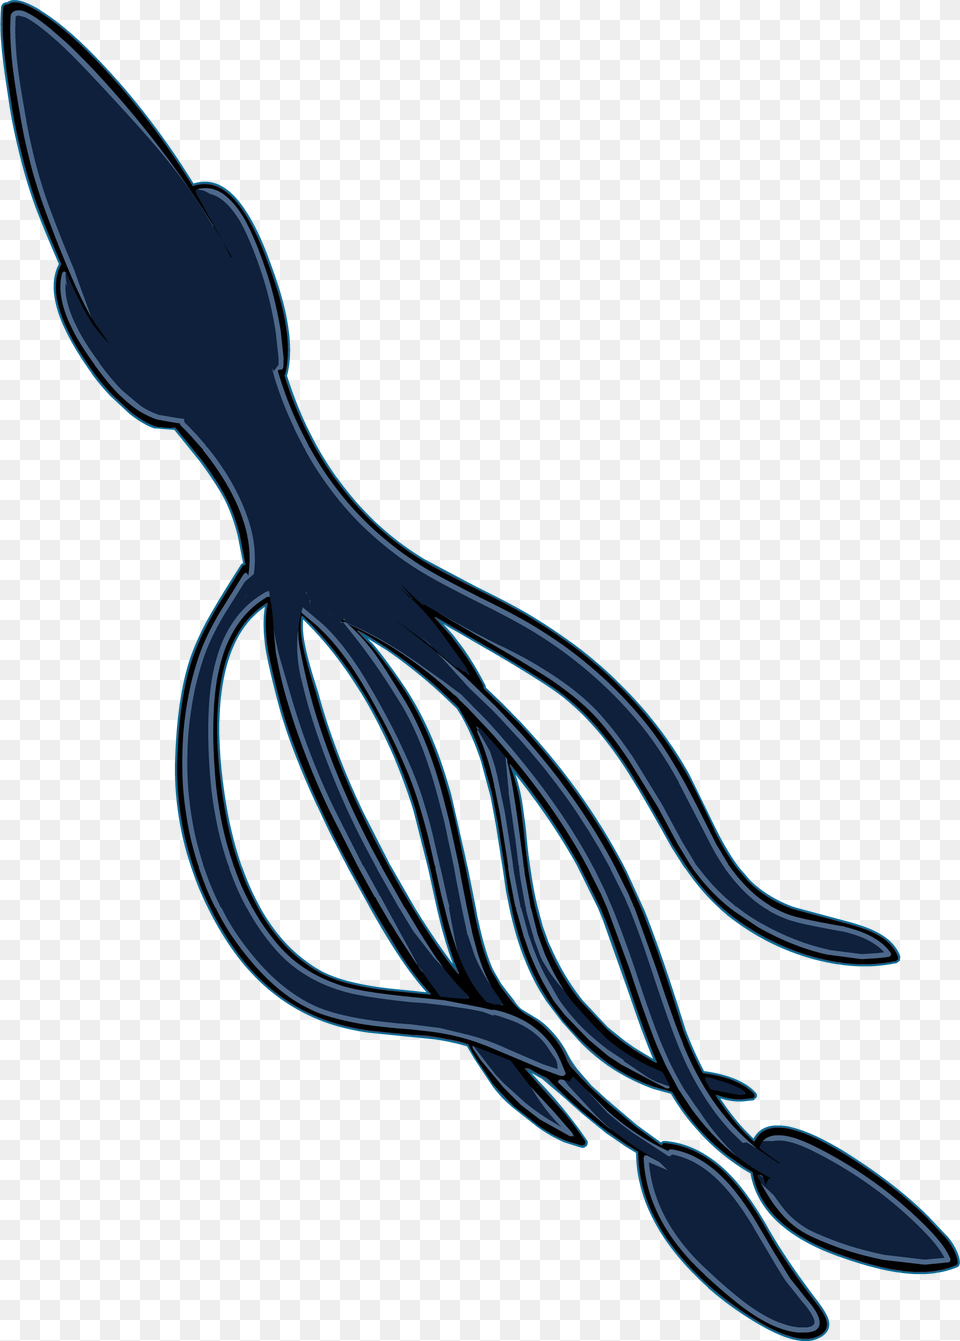 Giant Squid Illustration, Cutlery, Animal, Sea Life, Seafood Png Image